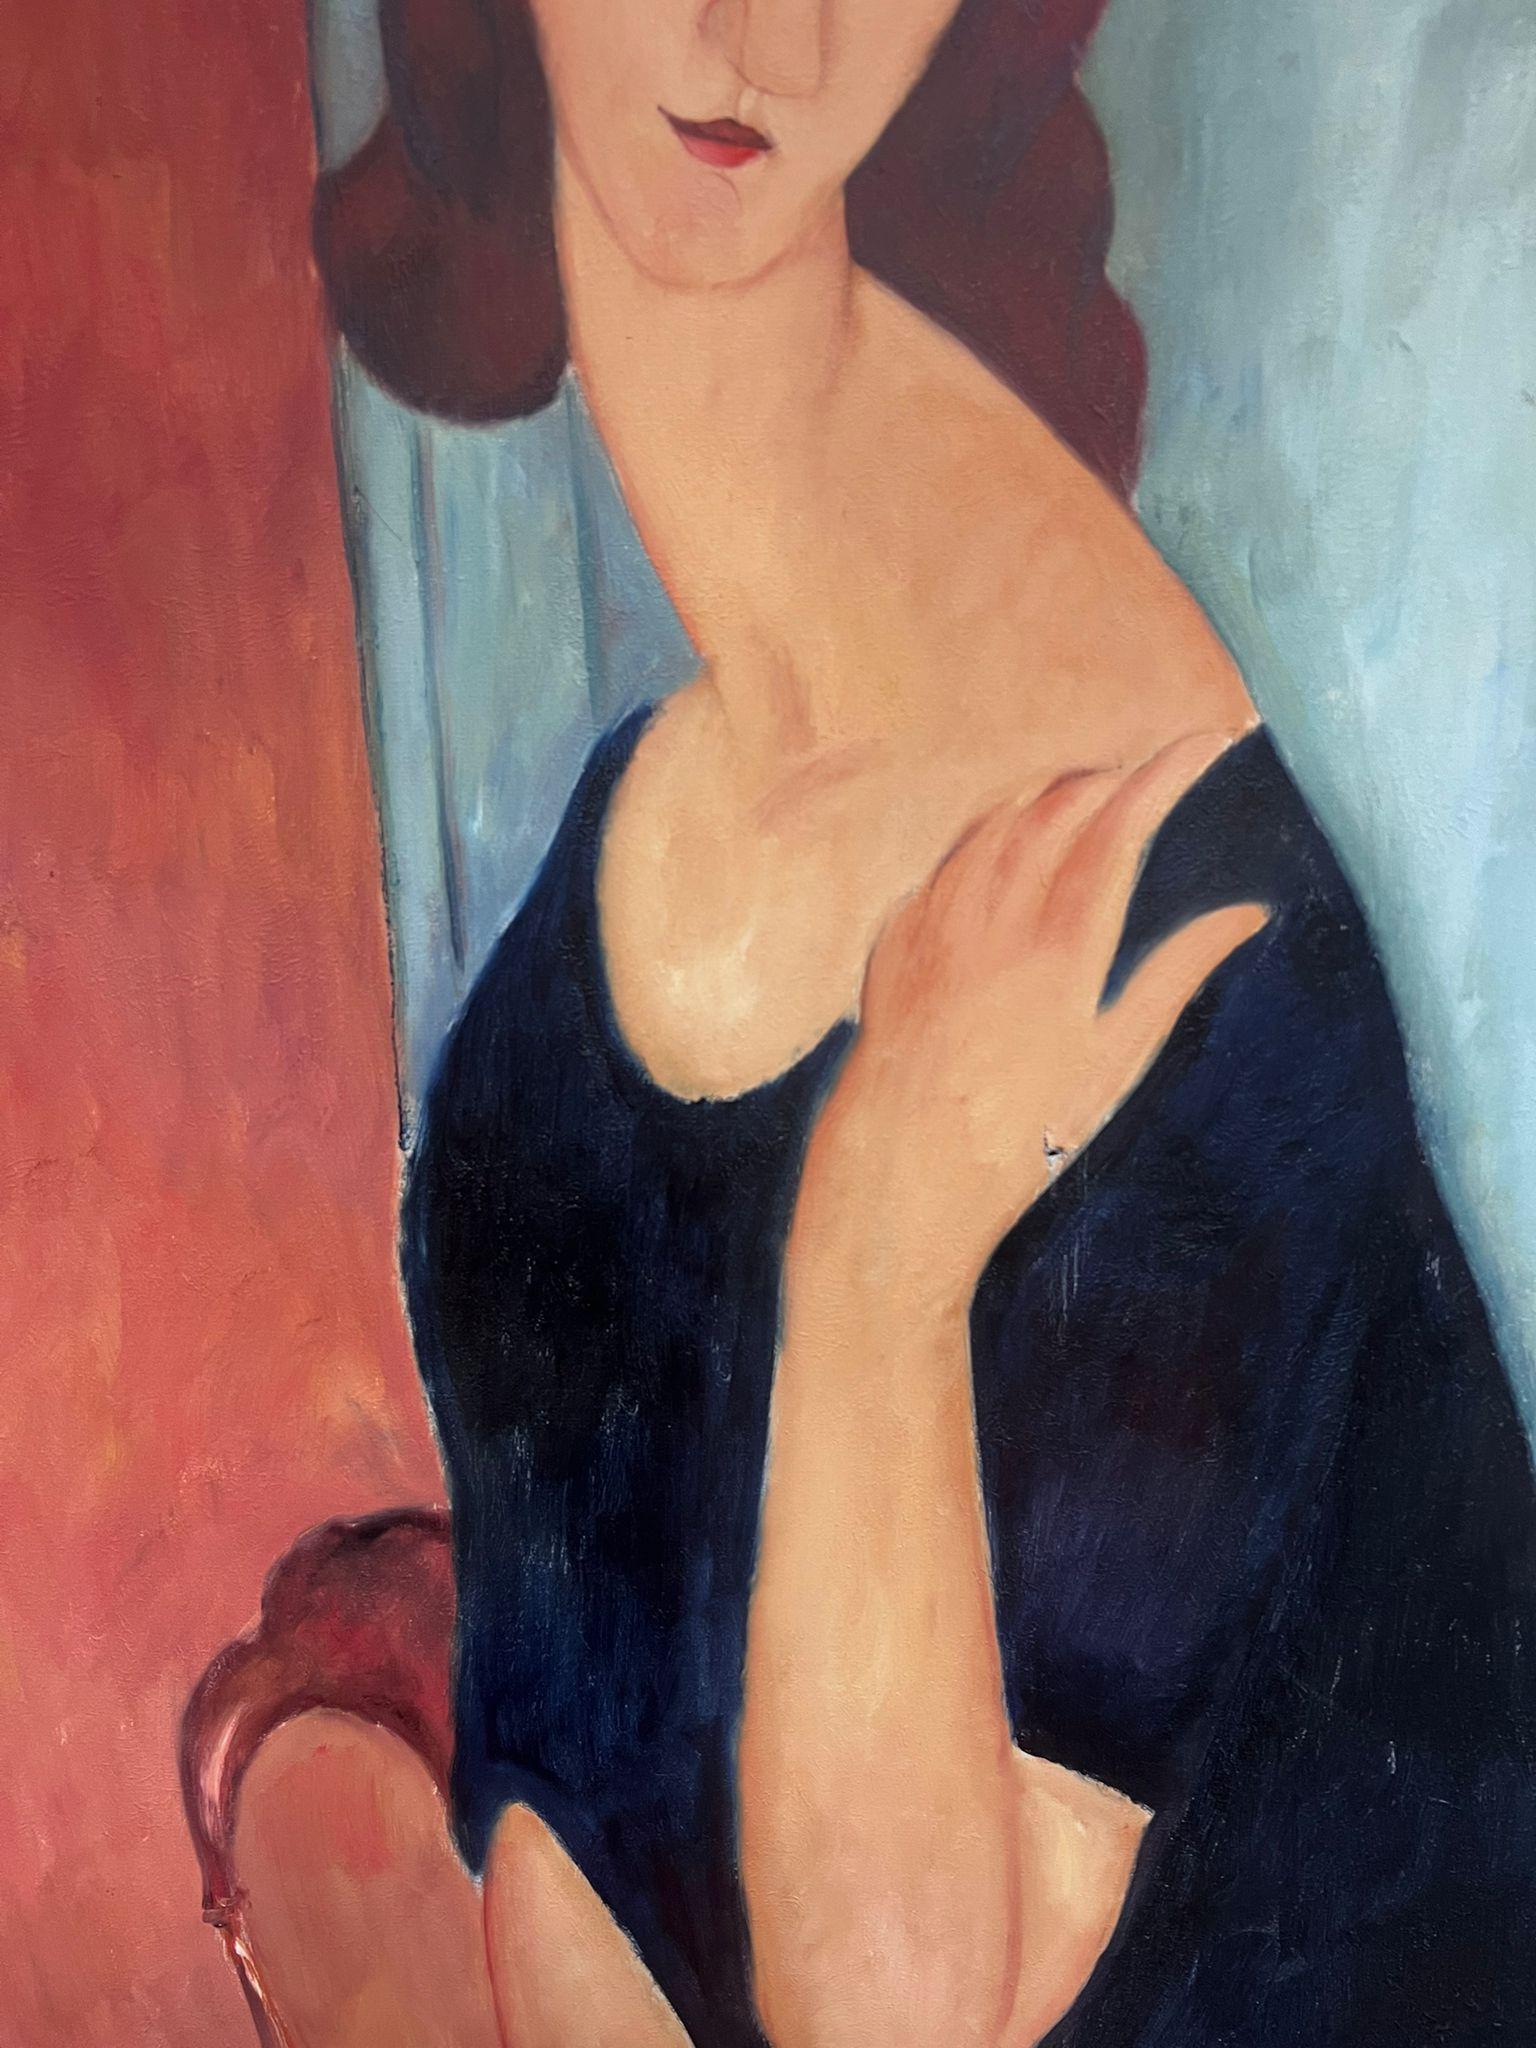 Portrait of a Woman
after Modigliani (see details verso)
oil on canvas, unframed
canvas: 36 x 24 inches
provenance: private collection, England
condition: a few minor scuffs but overall good and sound condition 

Amedeo Modigliani was an Italian